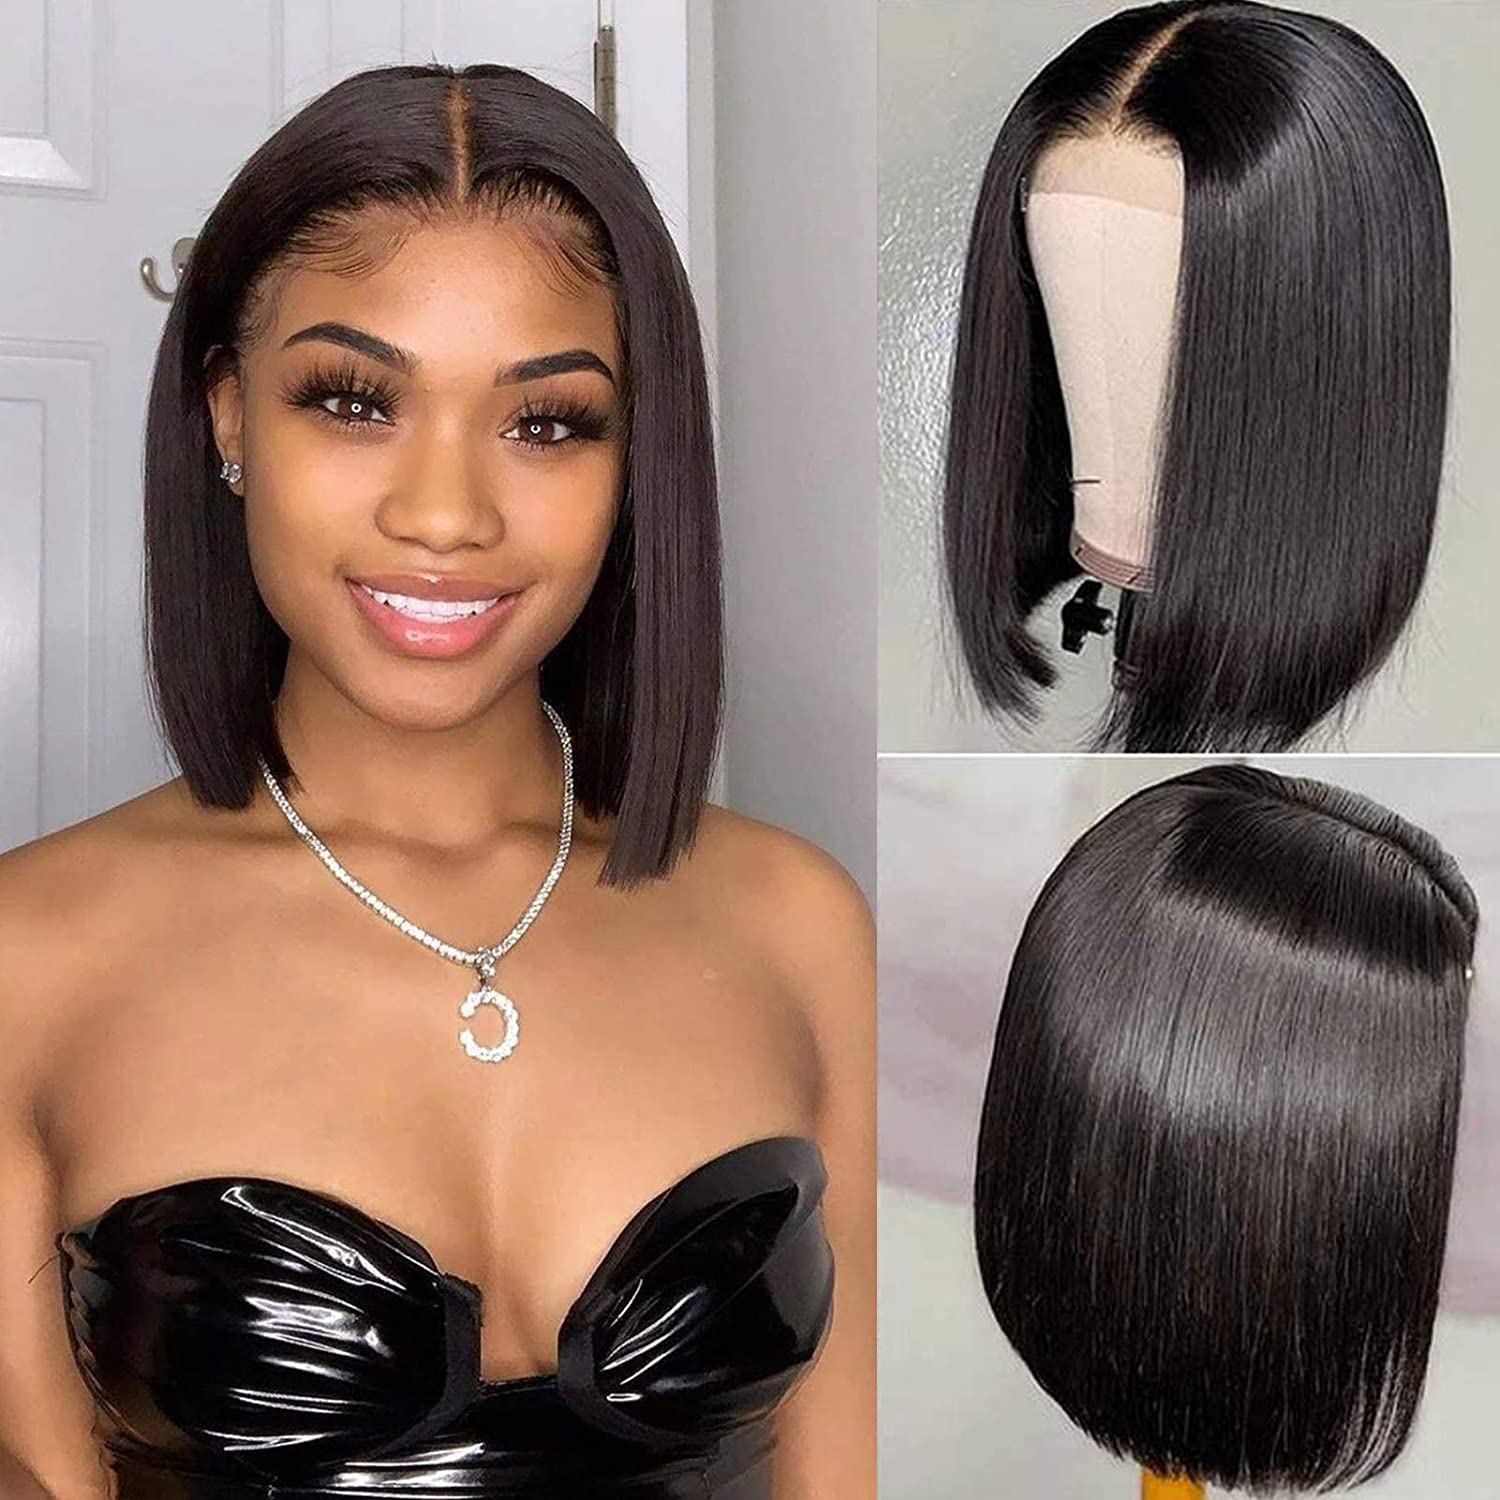 【$69】Gluna Hair Short Bob Wigs Straight Human Hair 13x4 5x5 4x4 Lace Frontal/Closure Wigs For Black Women Brazilian Virgin Hair with Baby Hair Pre Plucked Natural Color